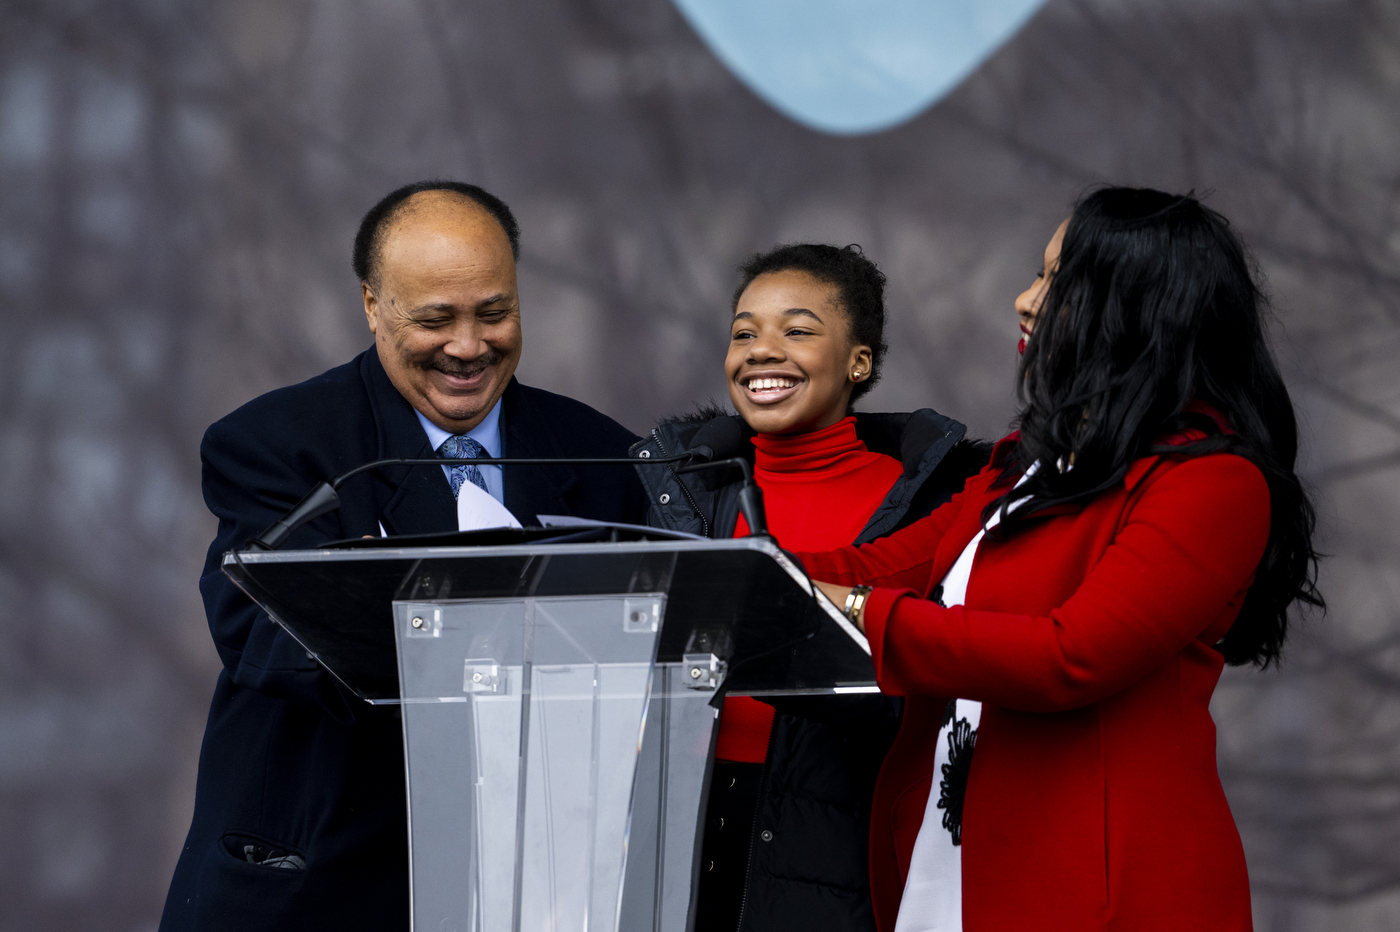 three people smile as they stand behind a podium